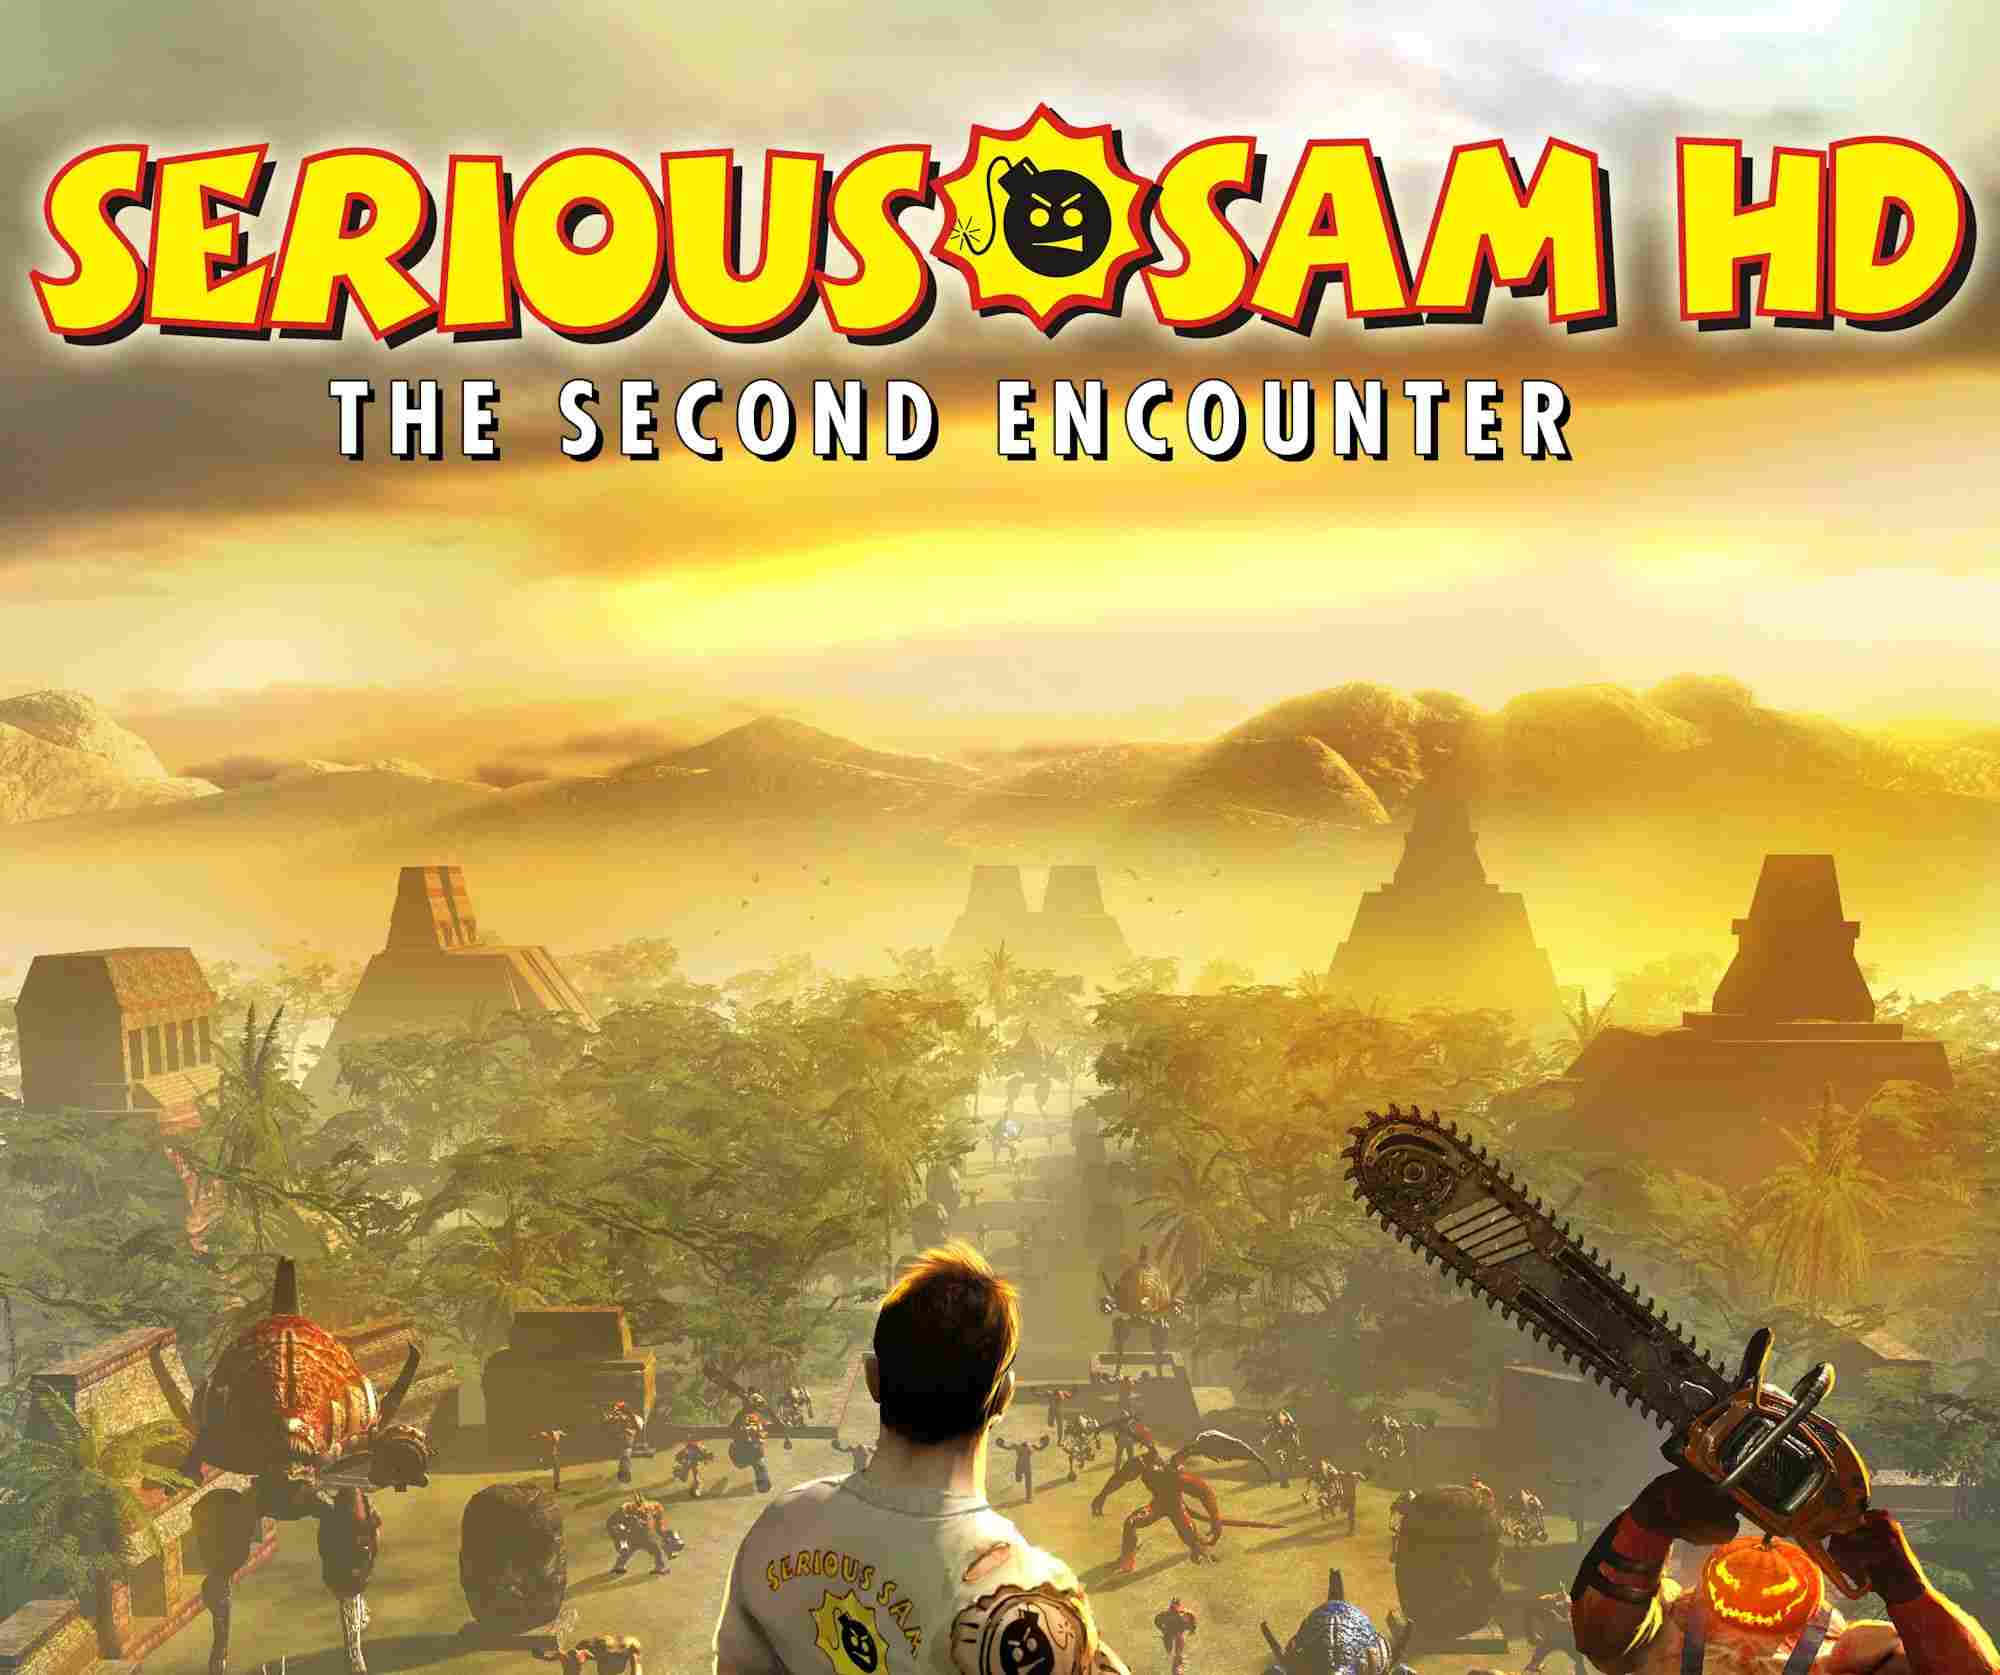 serious-sam-hd-the-second-encounter-multiplayer-crack-skieyleague